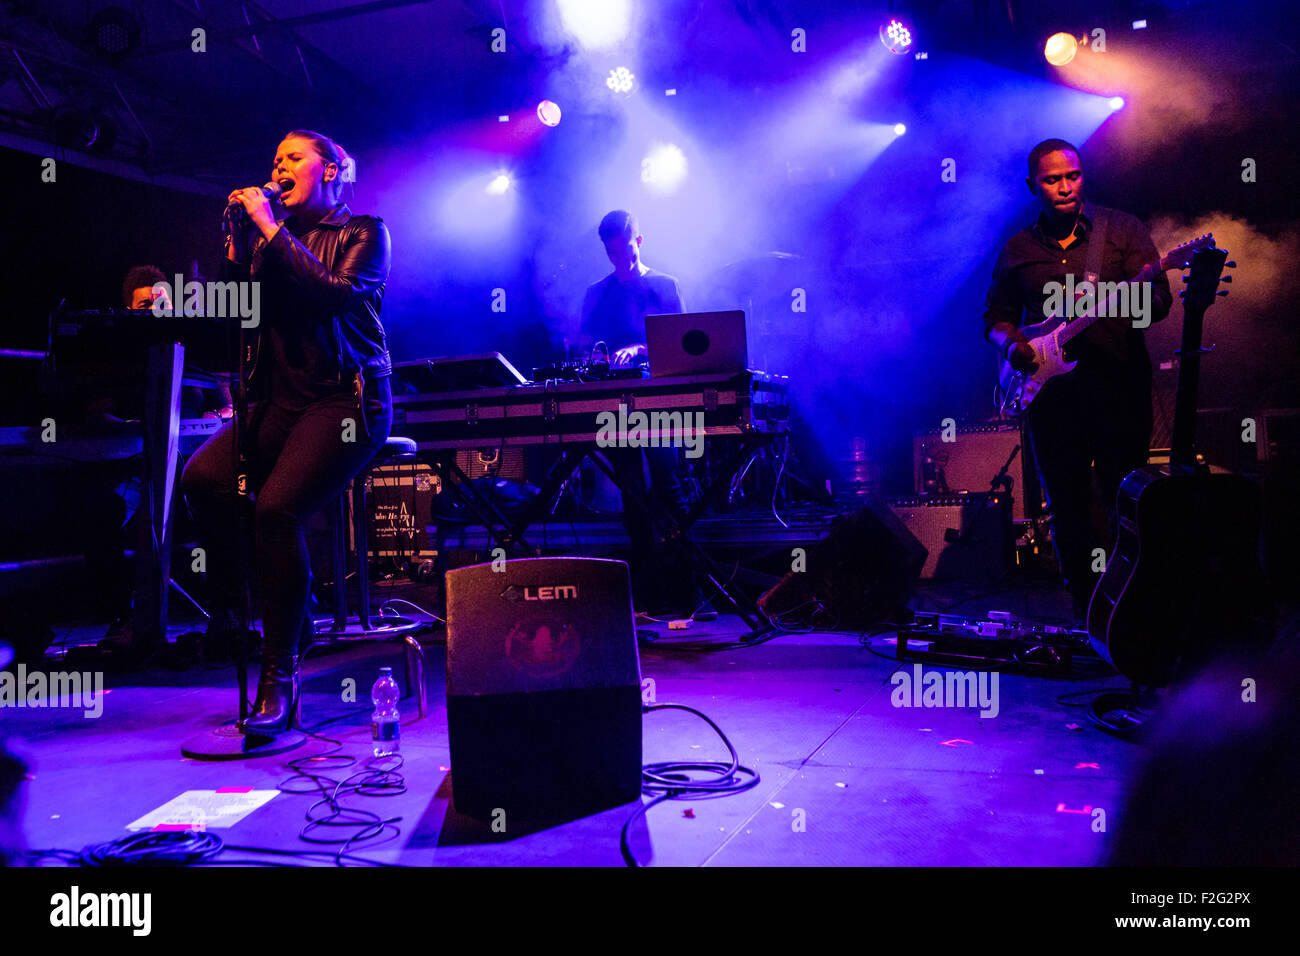 Milan Italy. 17th September 2015. The Australian singer GRACE performs live on stage at Circolo Magnolia opening the show of Leon Bridges Credit:  Rodolfo Sassano/Alamy Live News Stock Photo